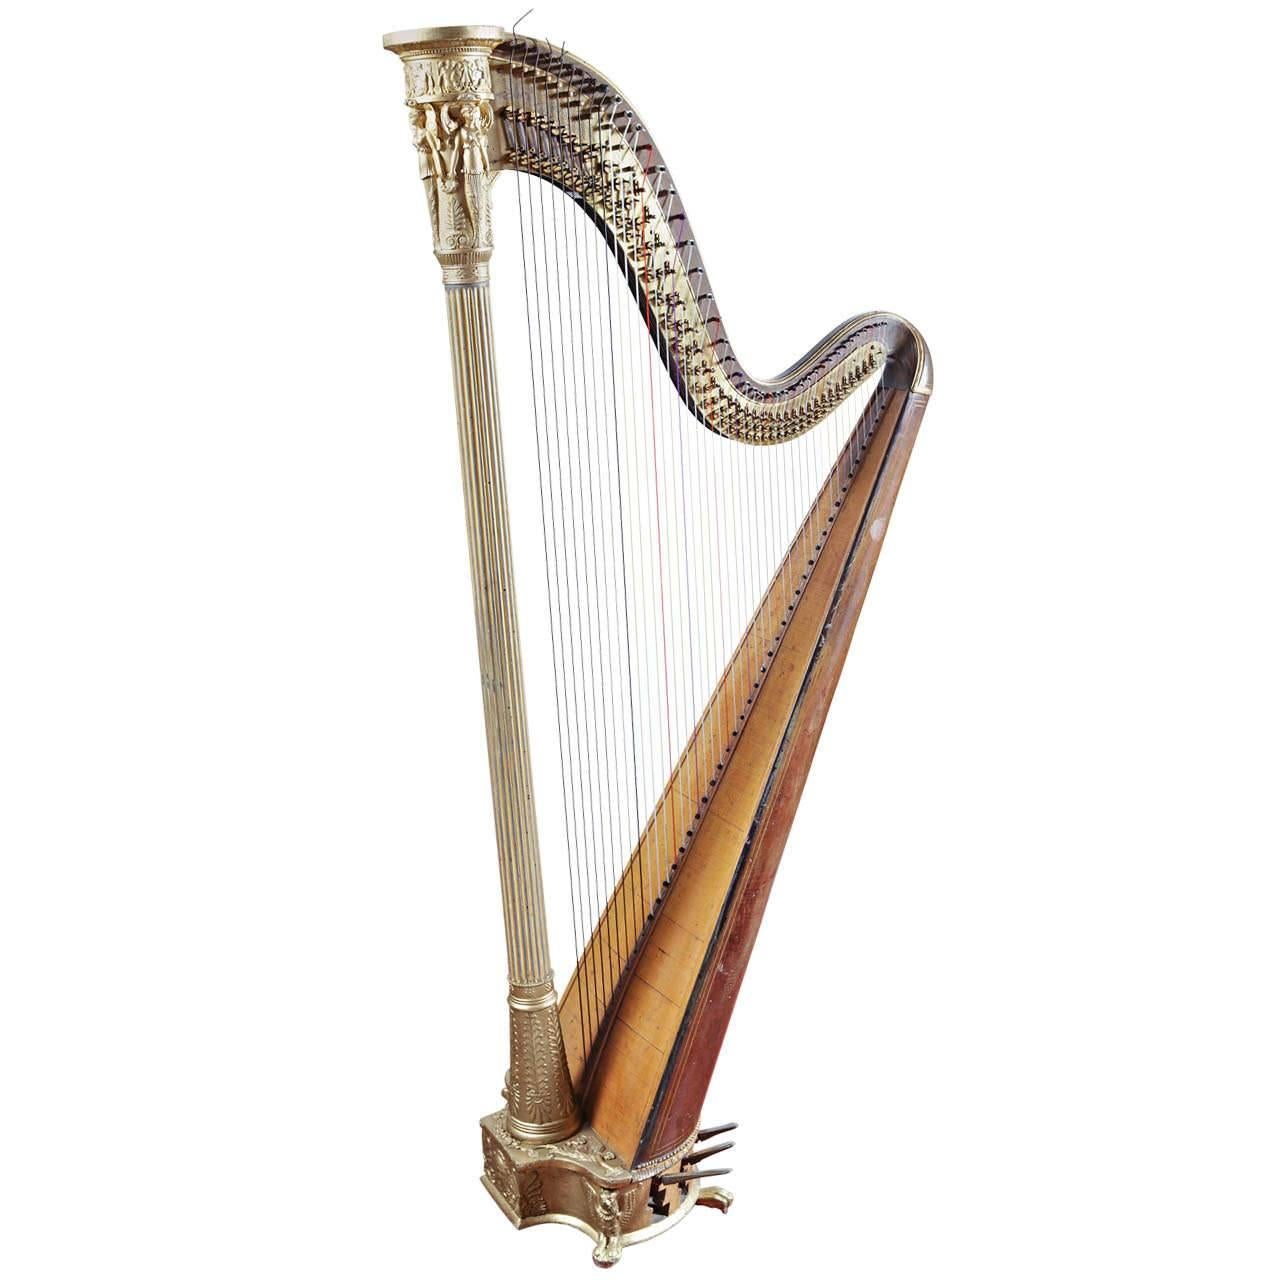 Early 19th Century French Maple and Gilt Double Action Harp by S. Erard, 1811